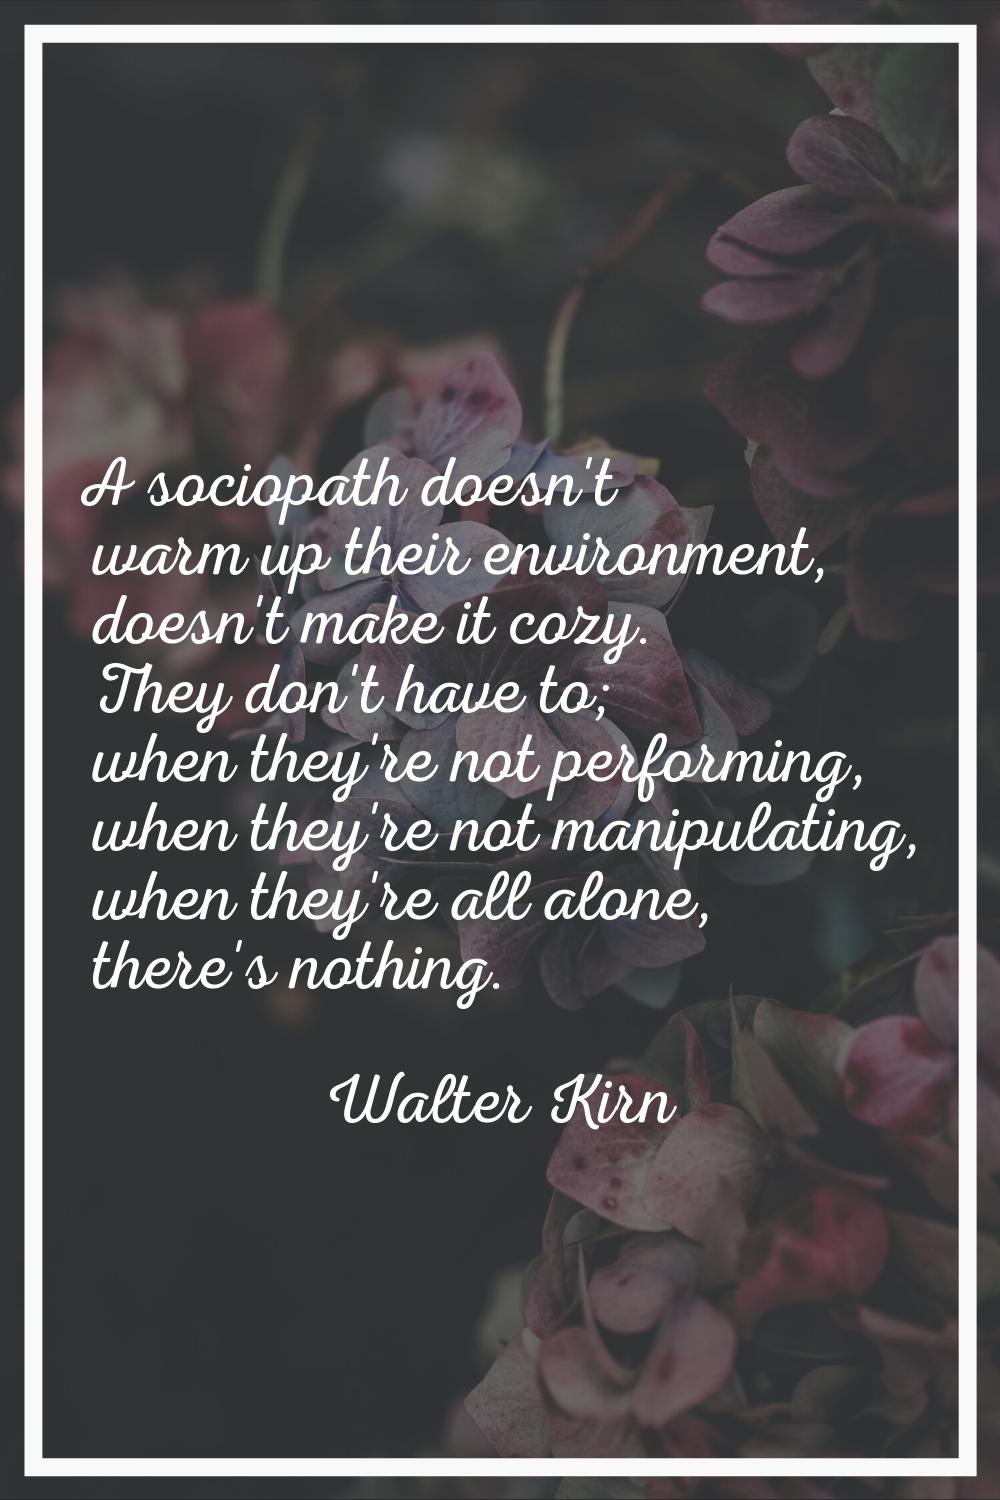 A sociopath doesn't warm up their environment, doesn't make it cozy. They don't have to; when they'